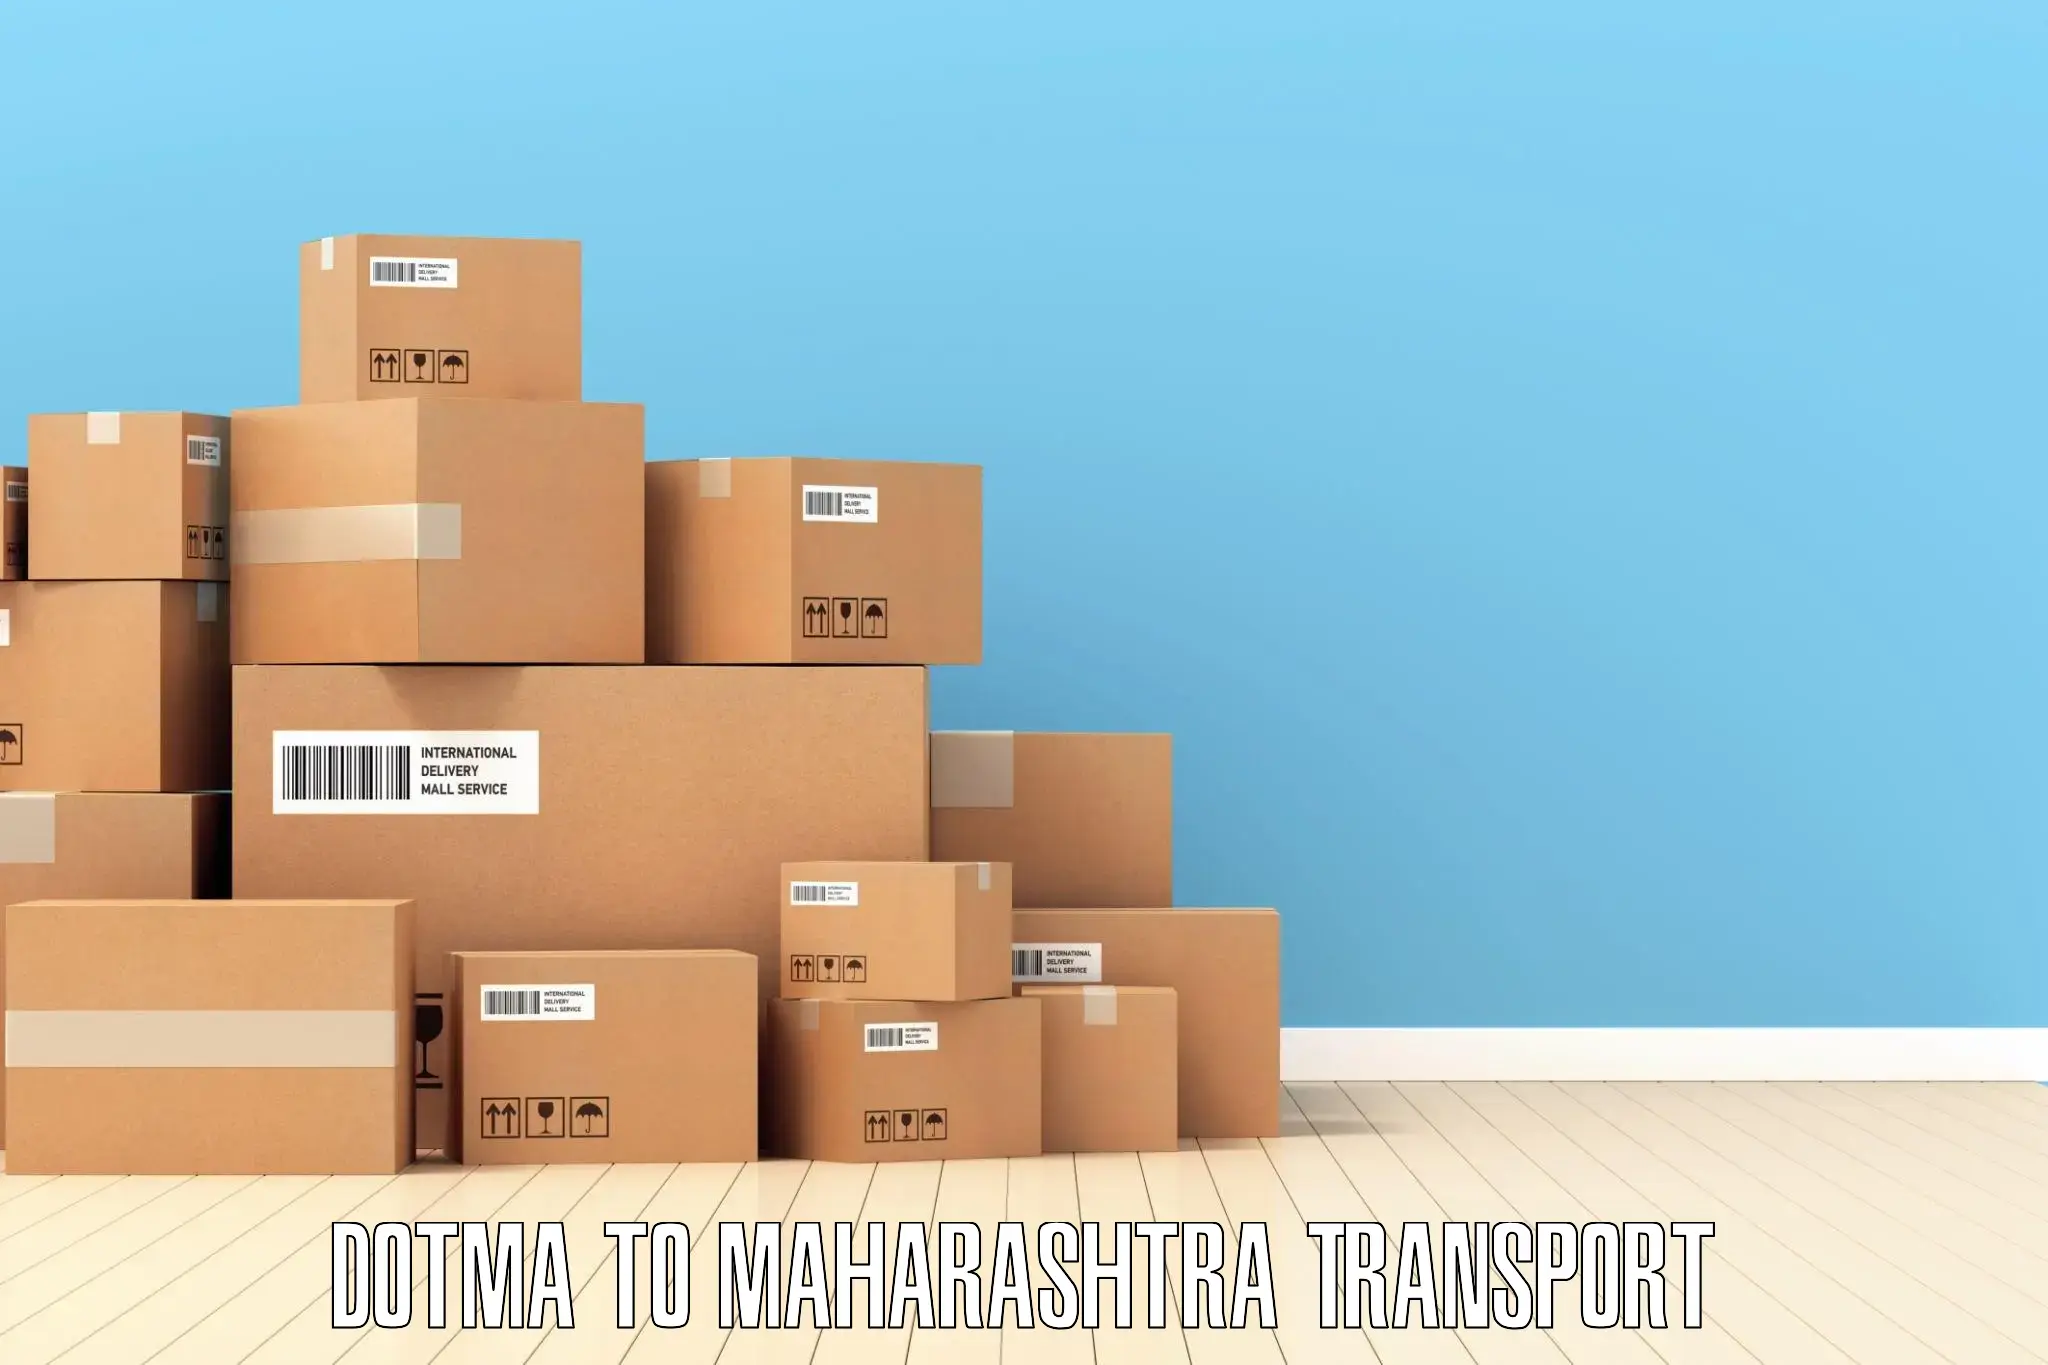 Container transport service in Dotma to Paratwada